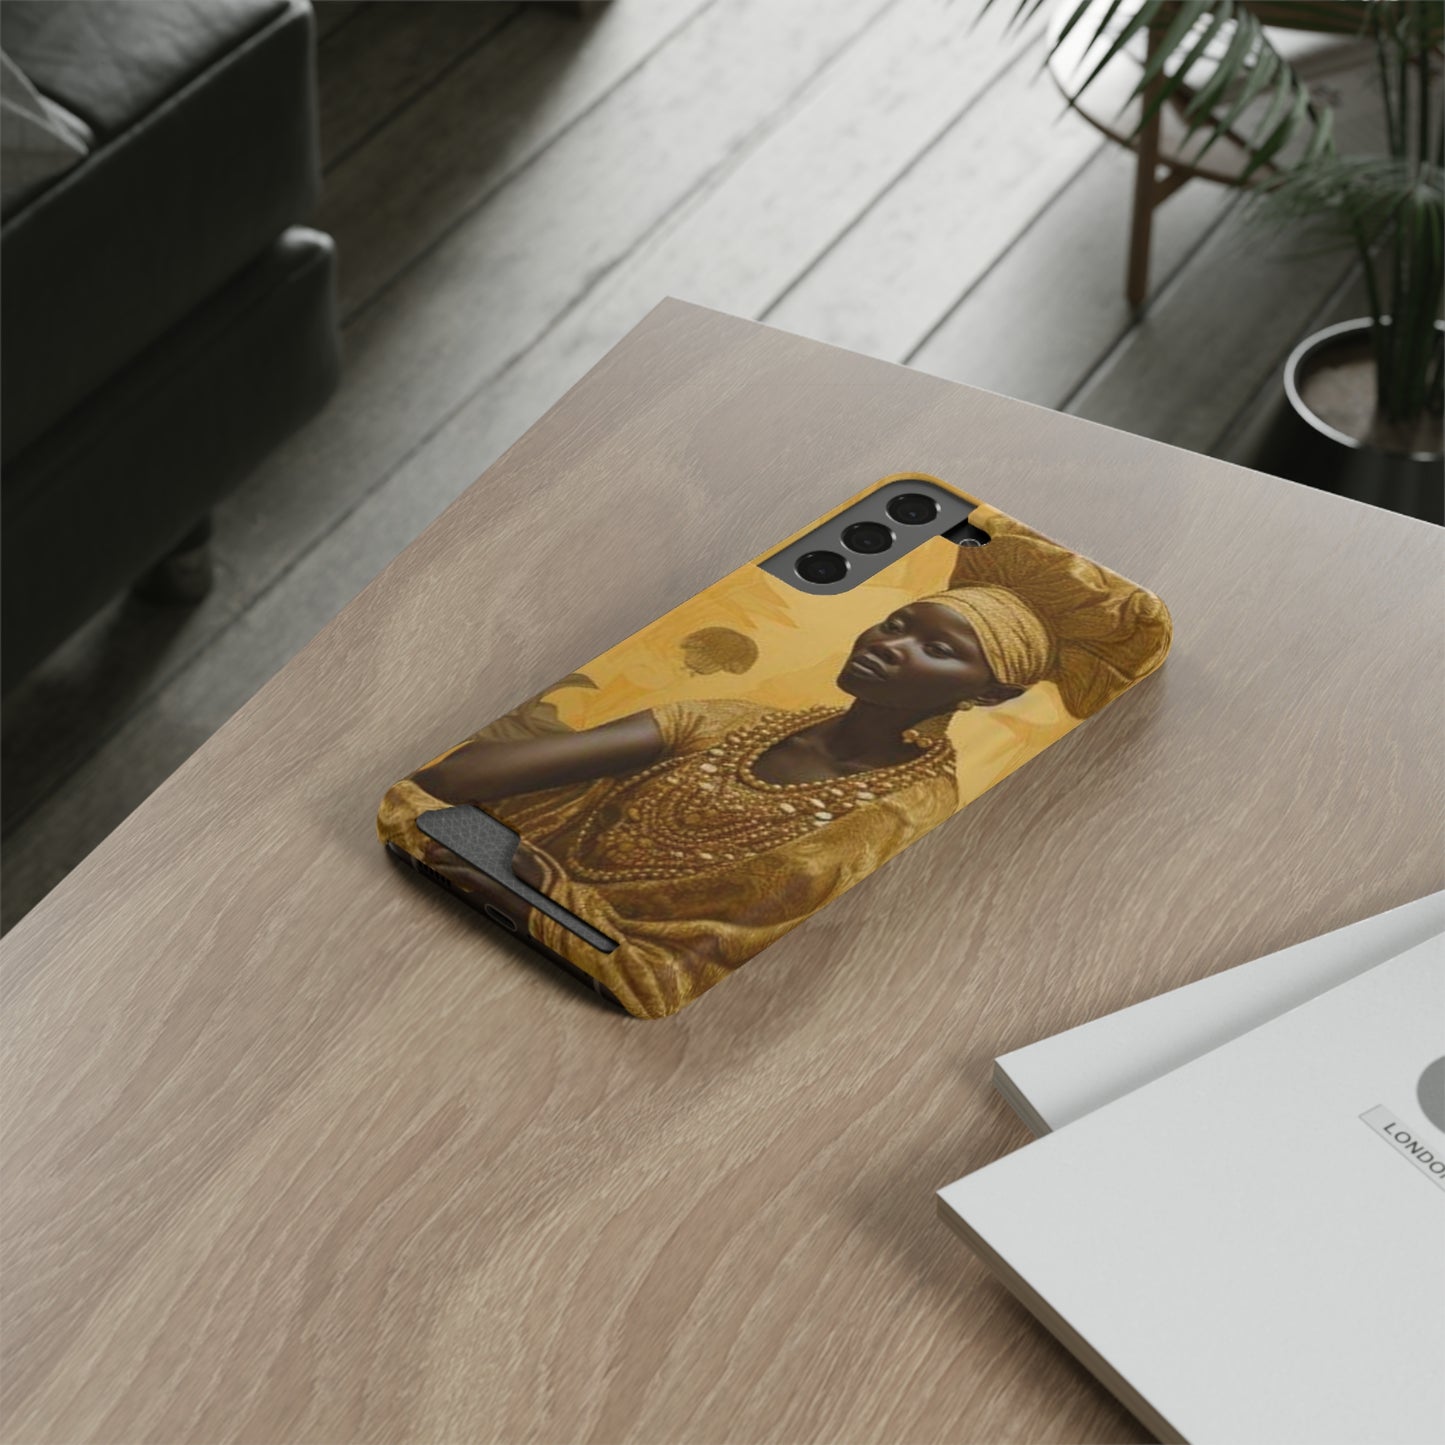 Osun the creator Phone Case With Card Holder